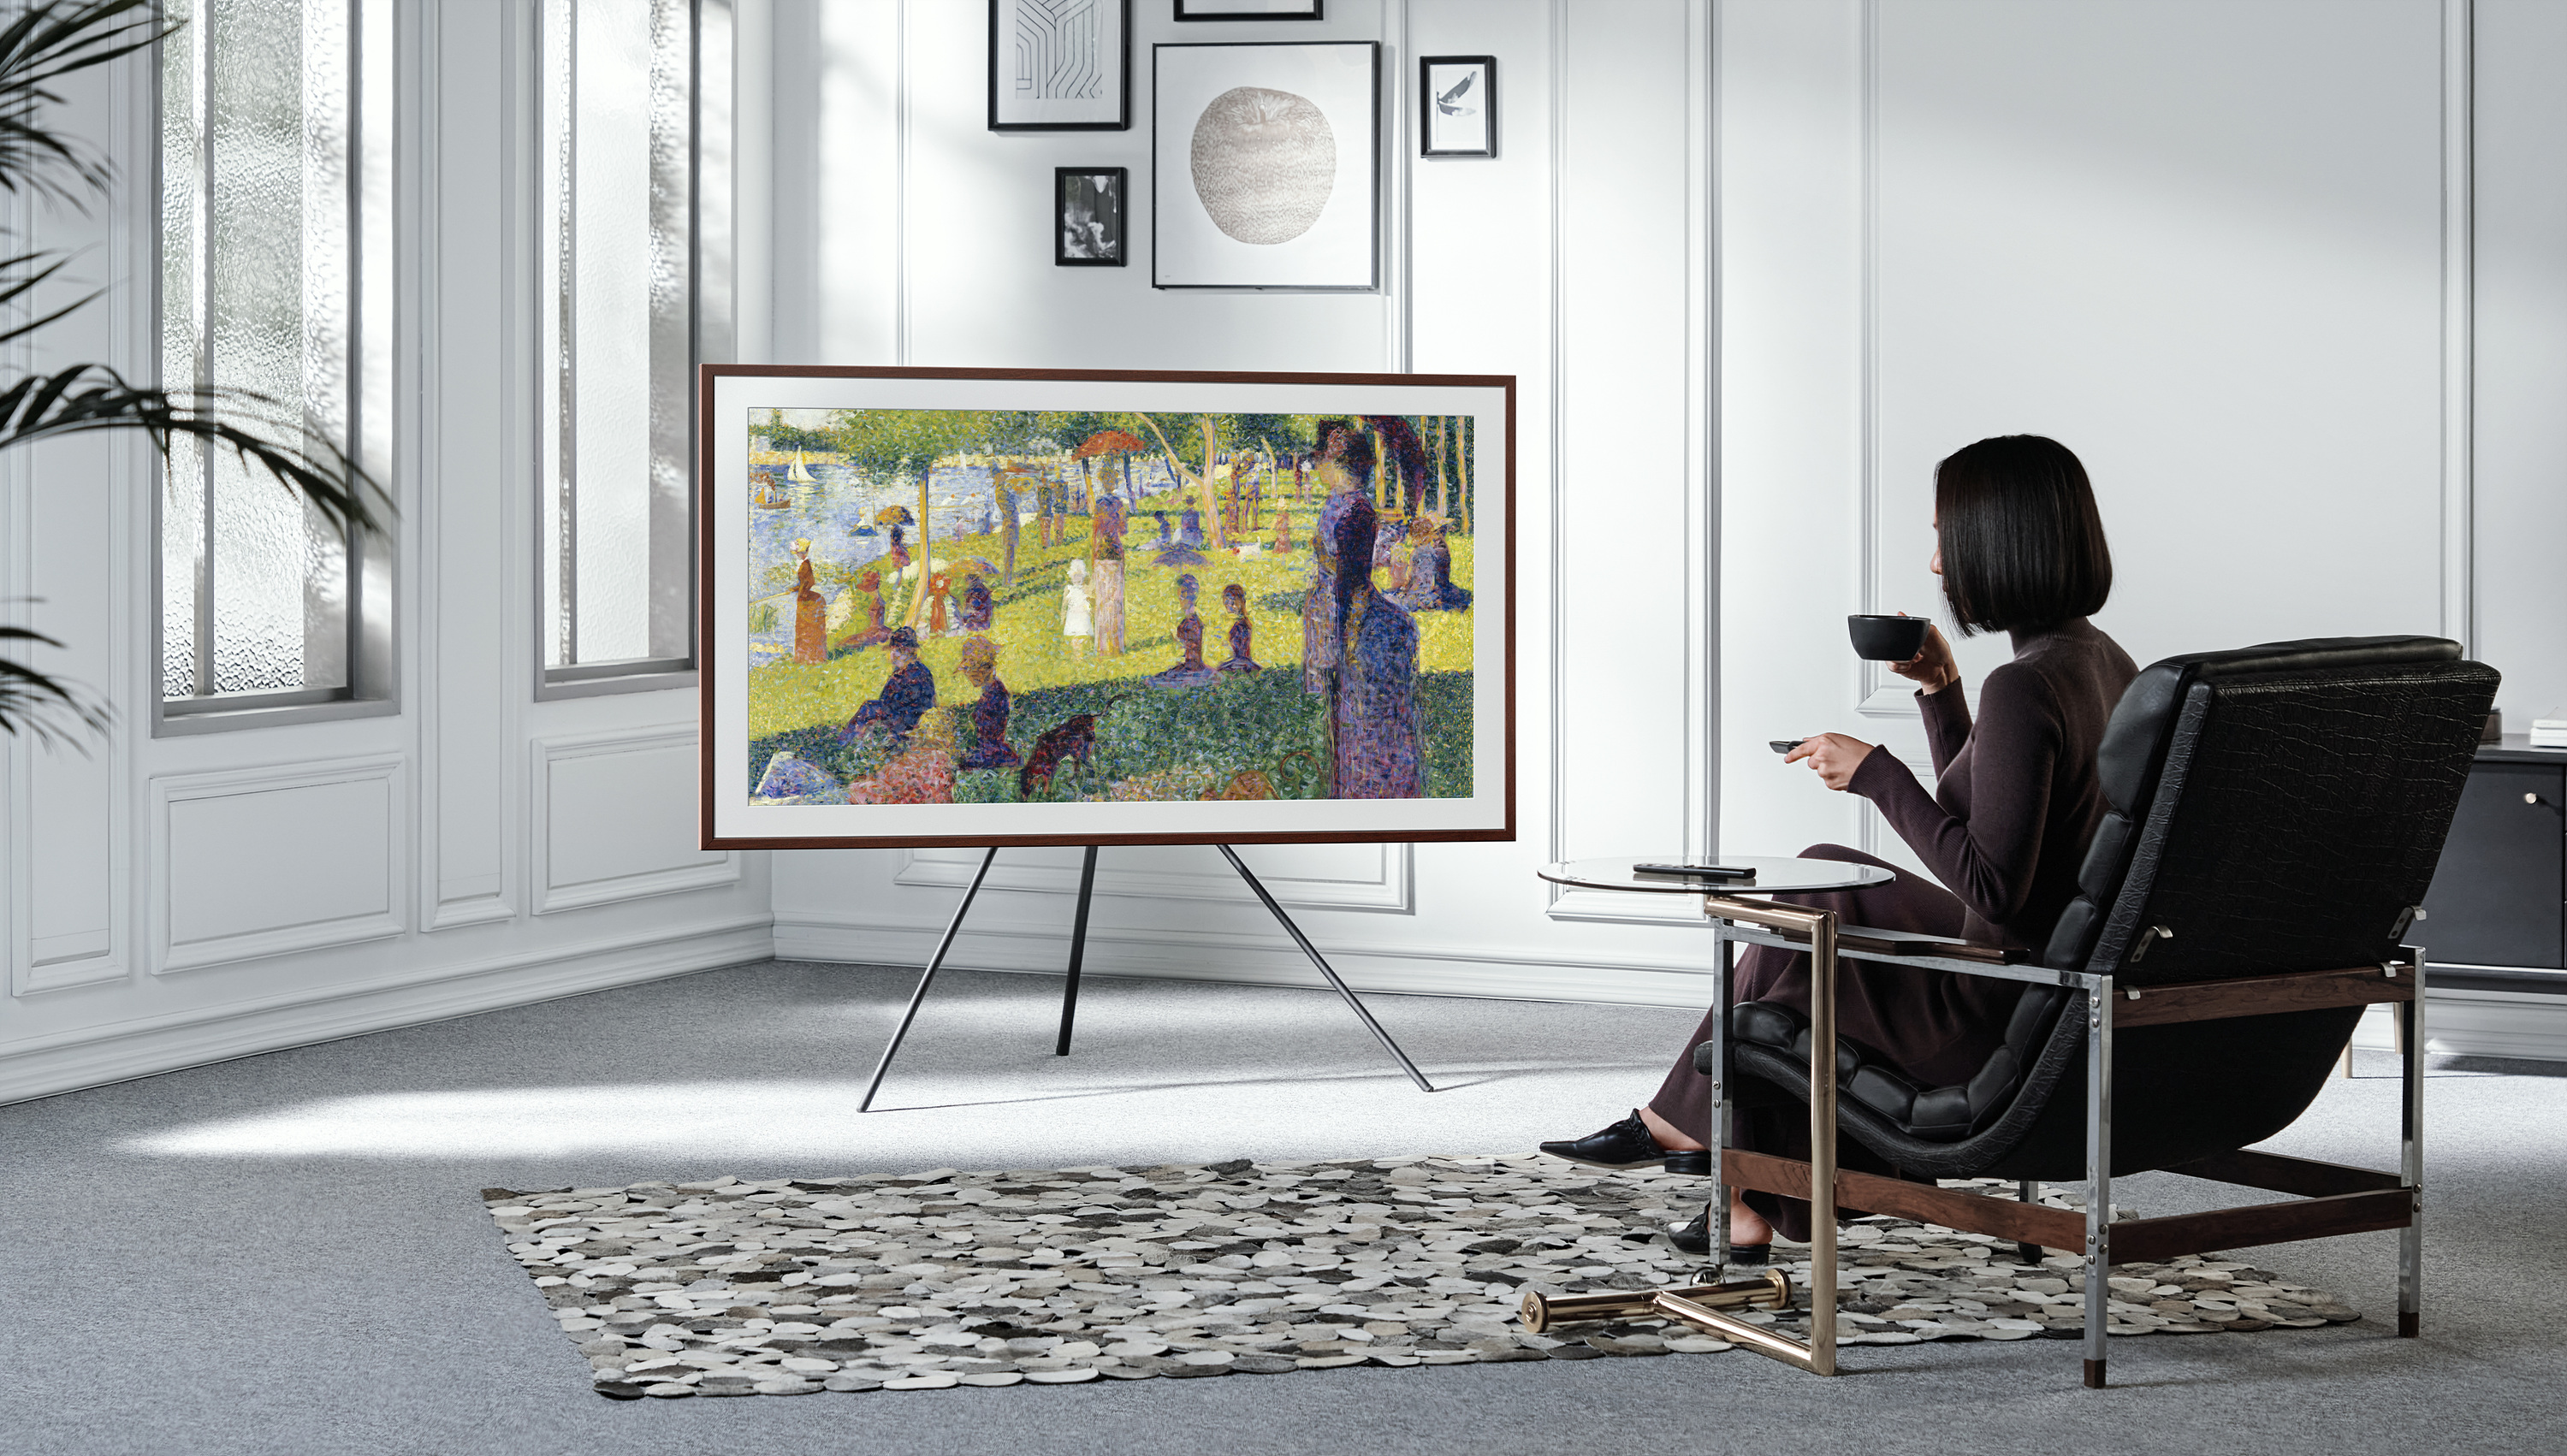 The Frame becomes Samsung’s first single-year million-seller in Lifestyle TV lineup